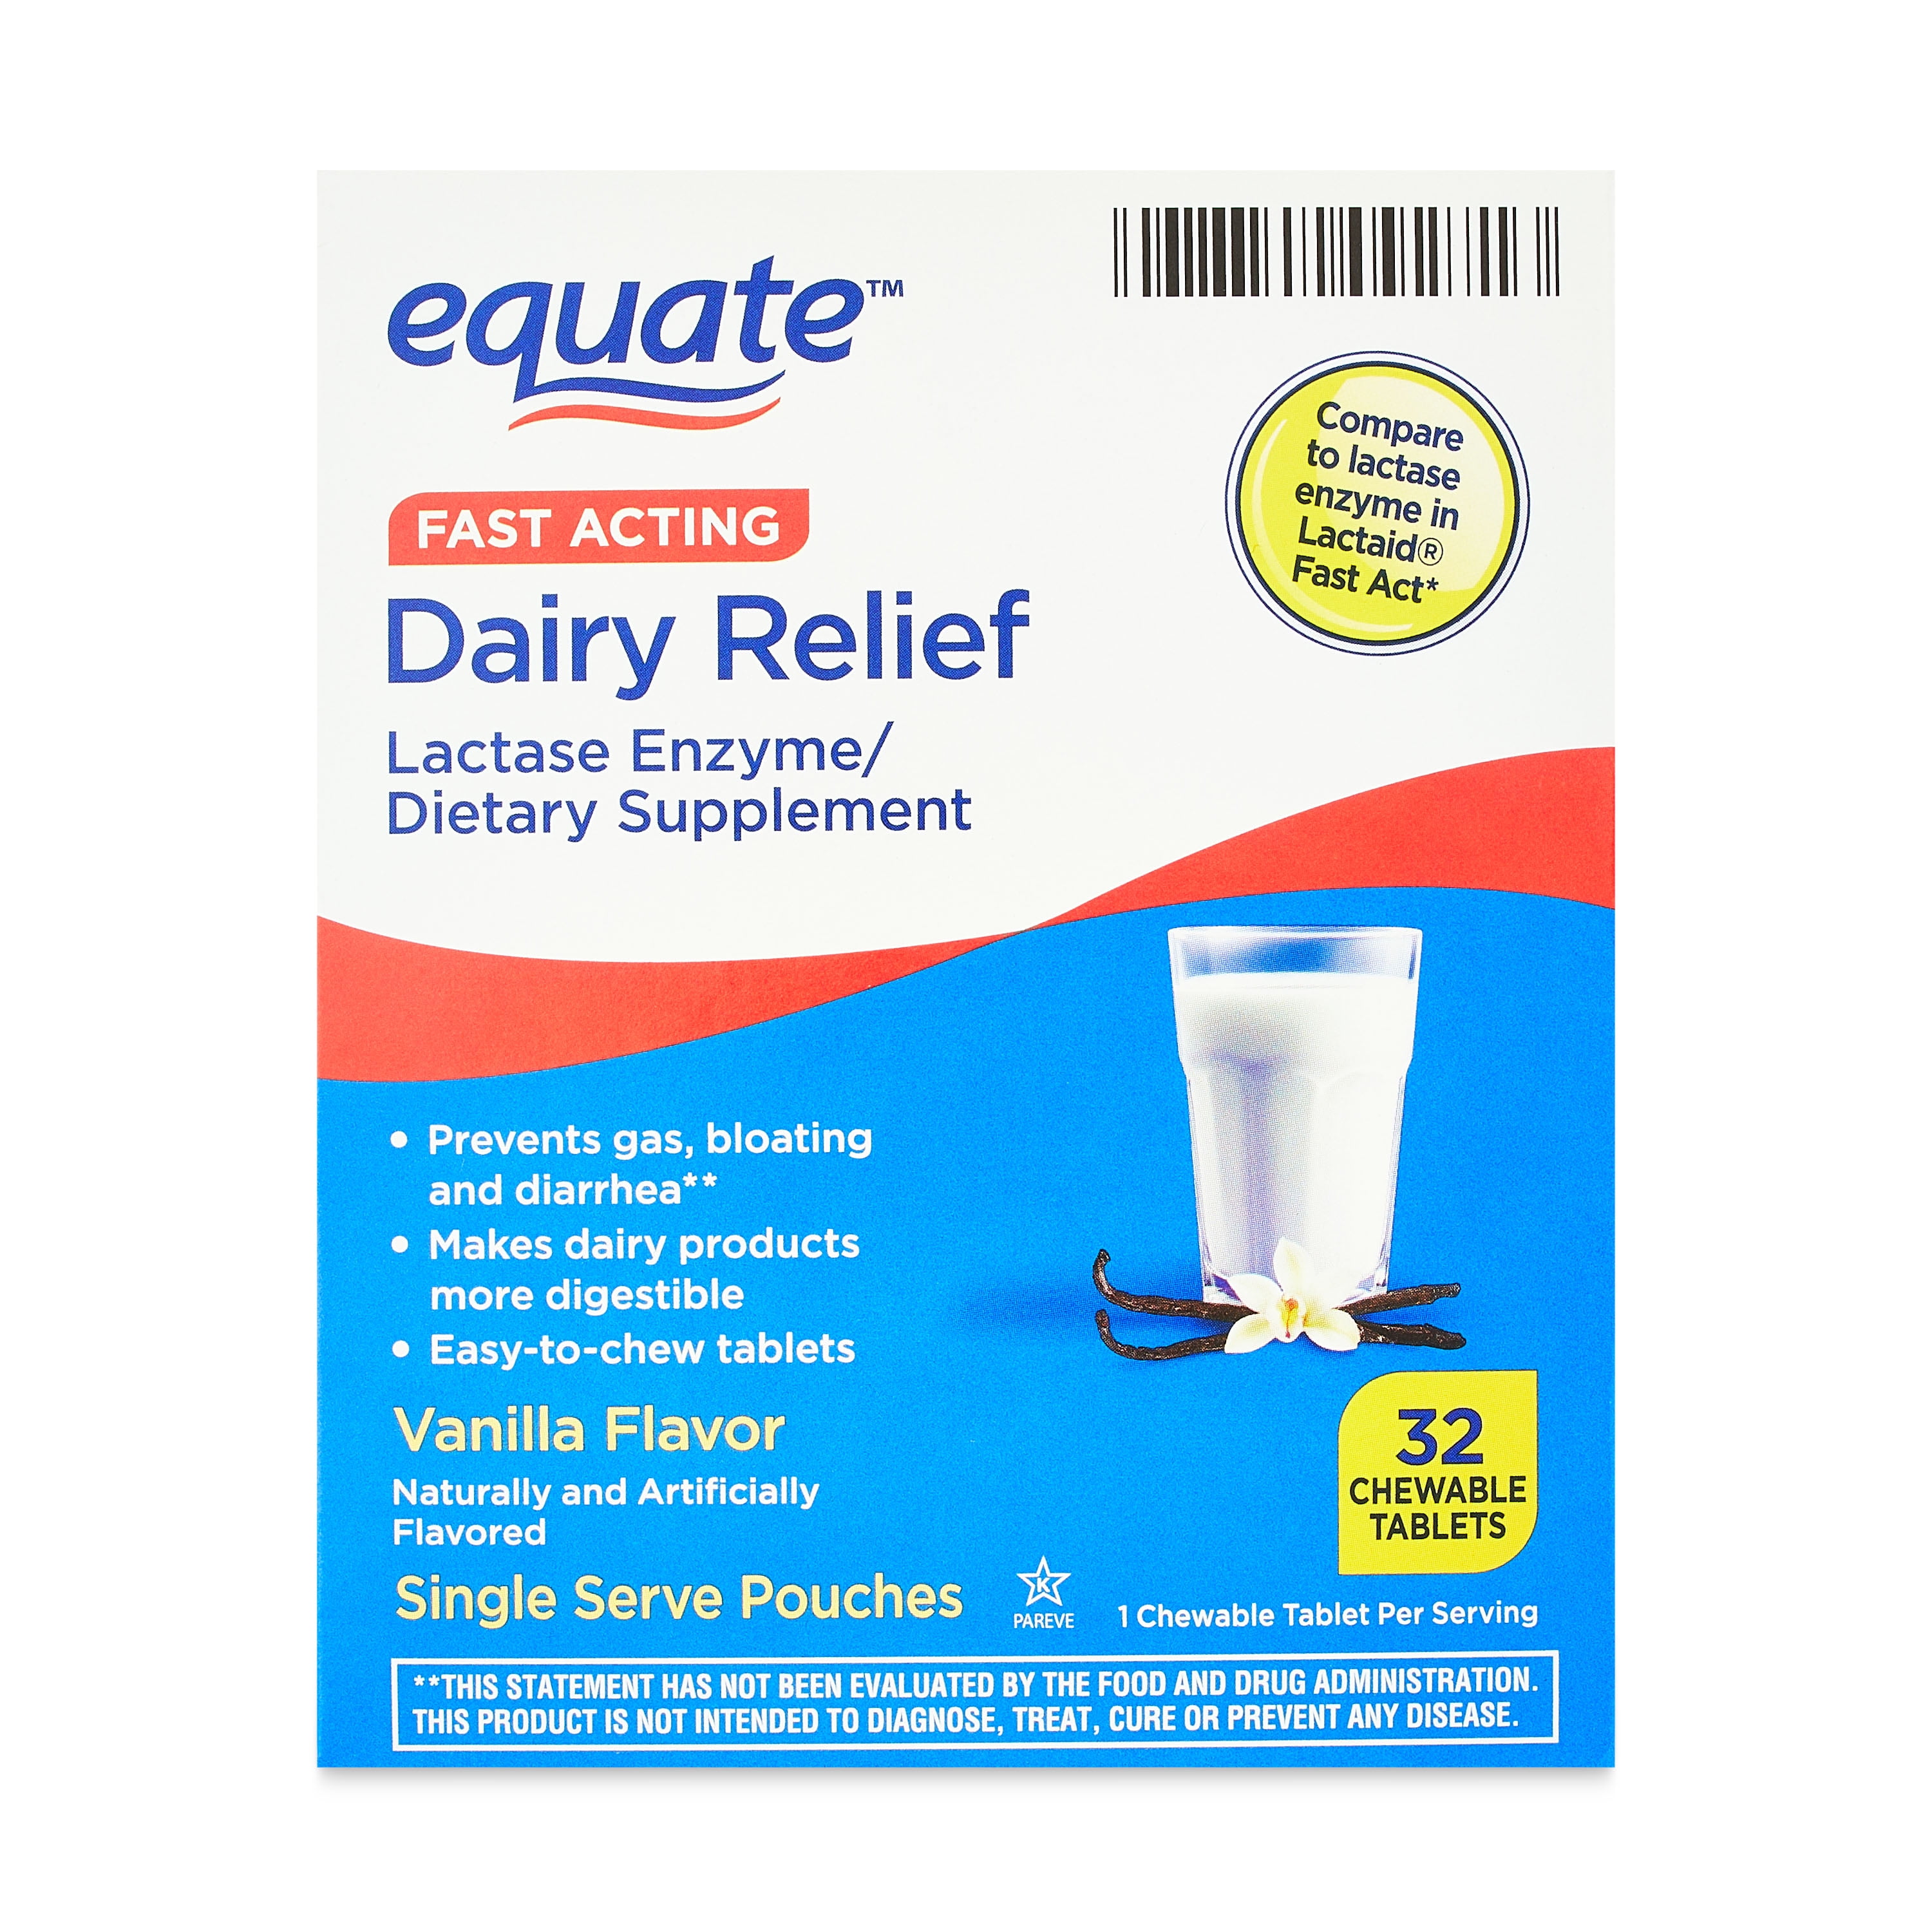 Equate Fast Acting Dairy Relief Vanilla Flavor Lactase Enzyme/Dietary Supplement, 32 count